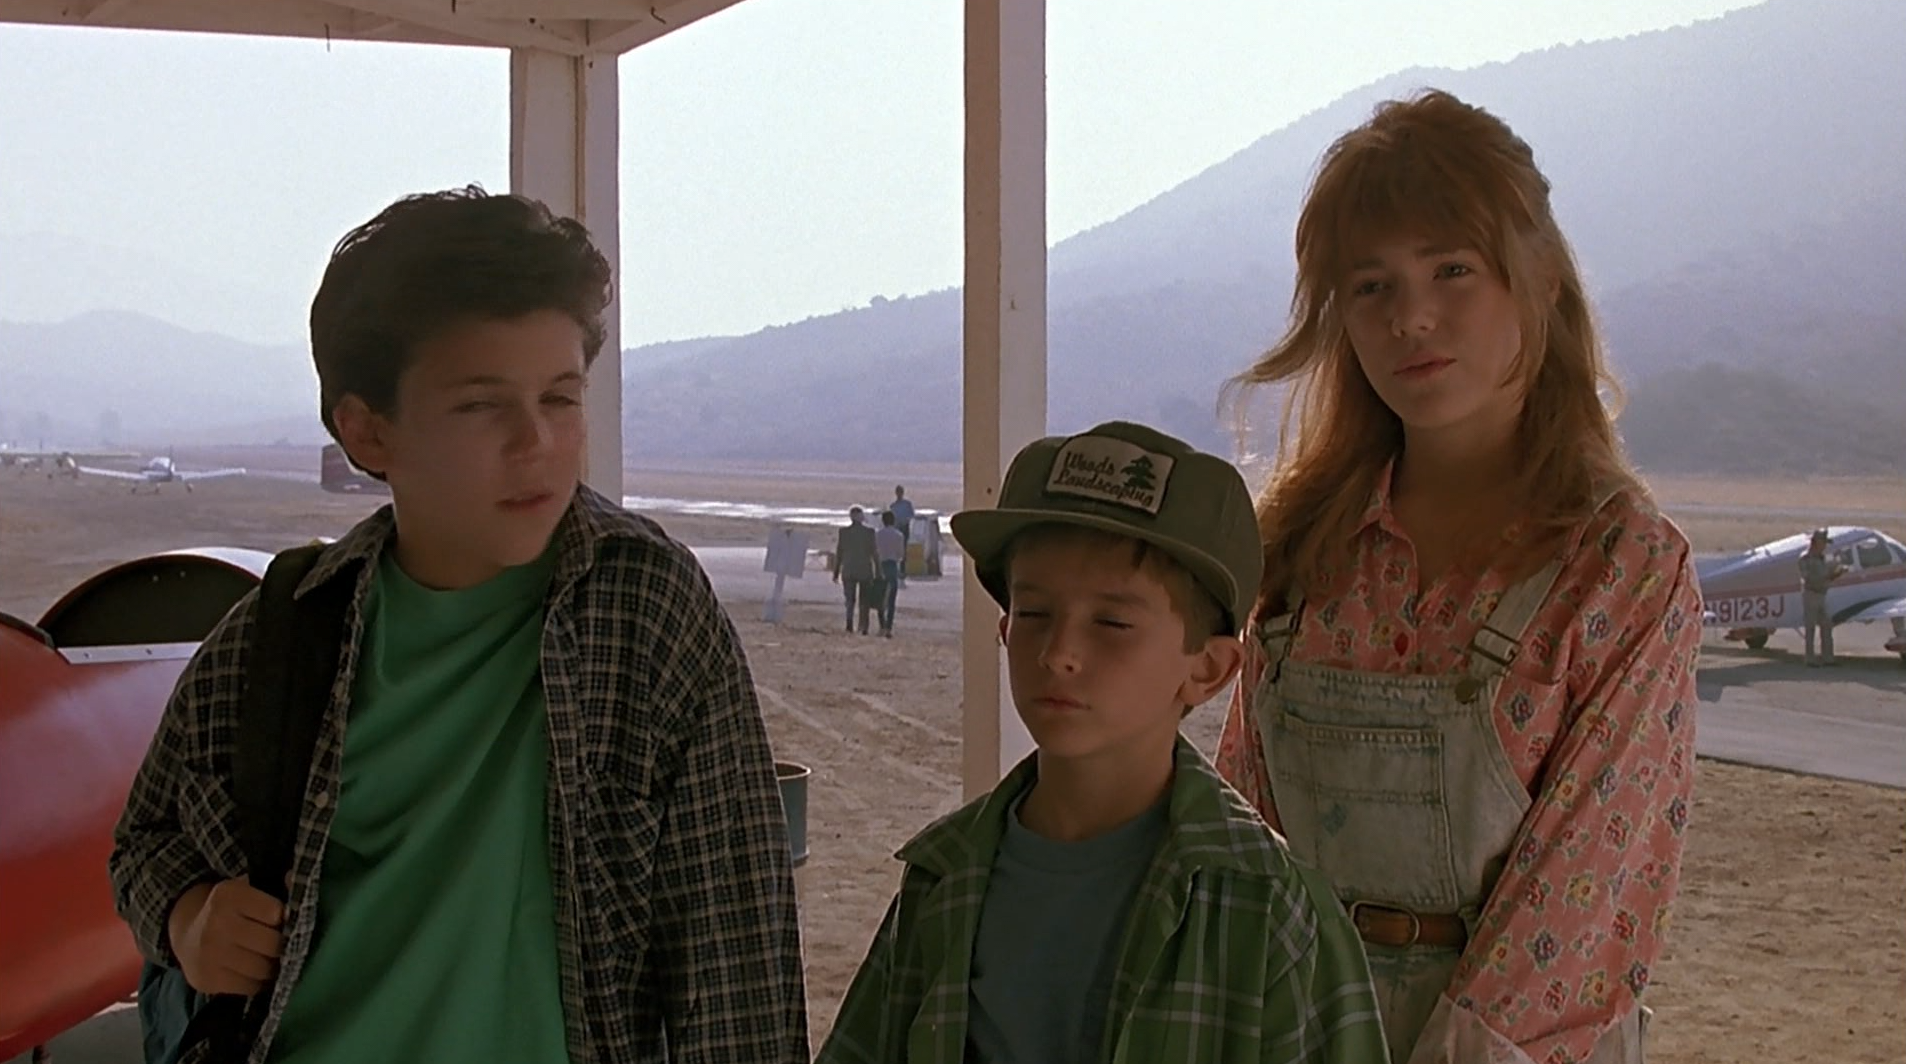 Corey, Jimmy, and Haley